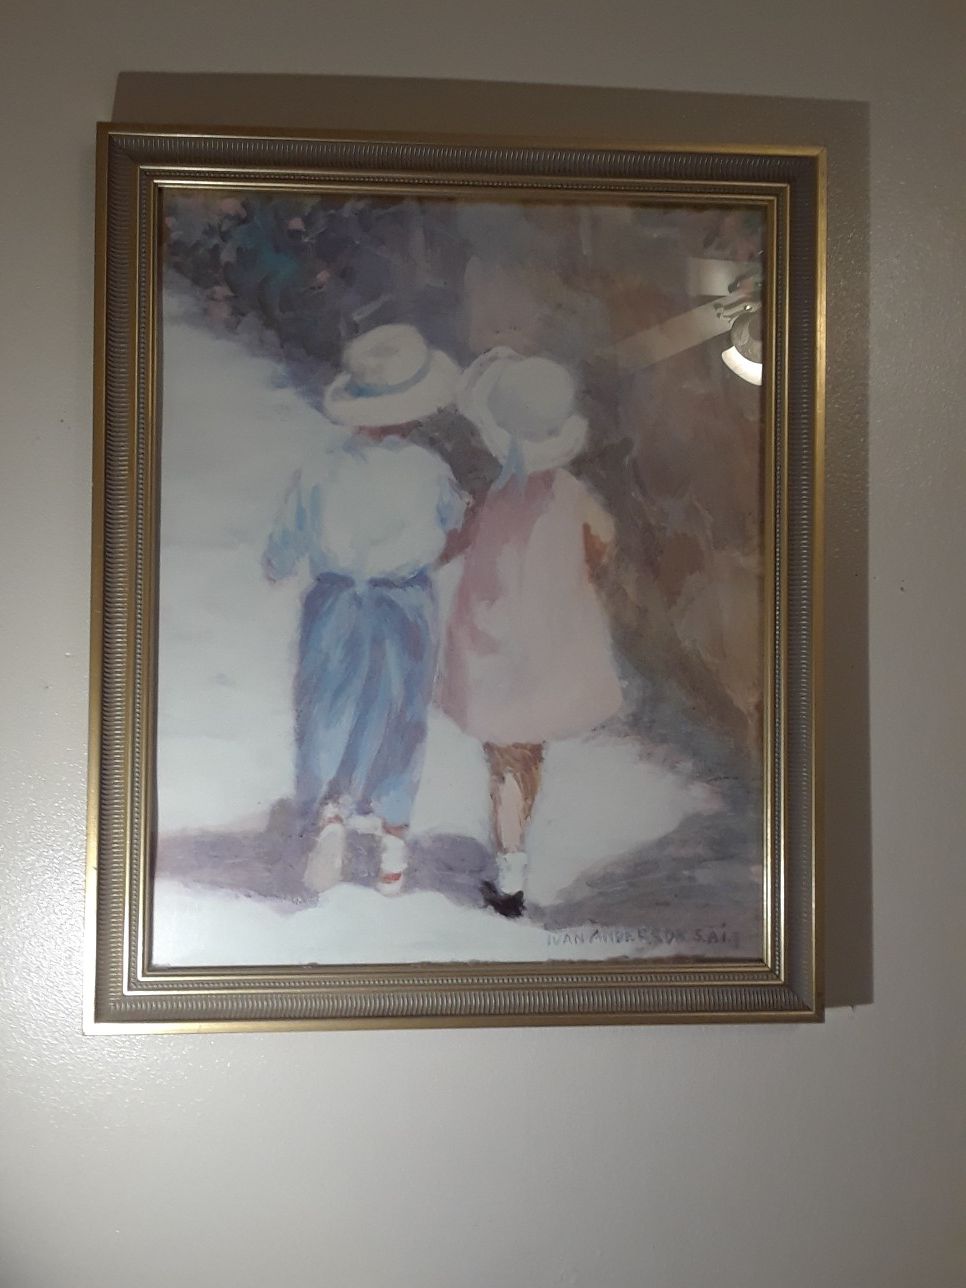 Painting in glass frame